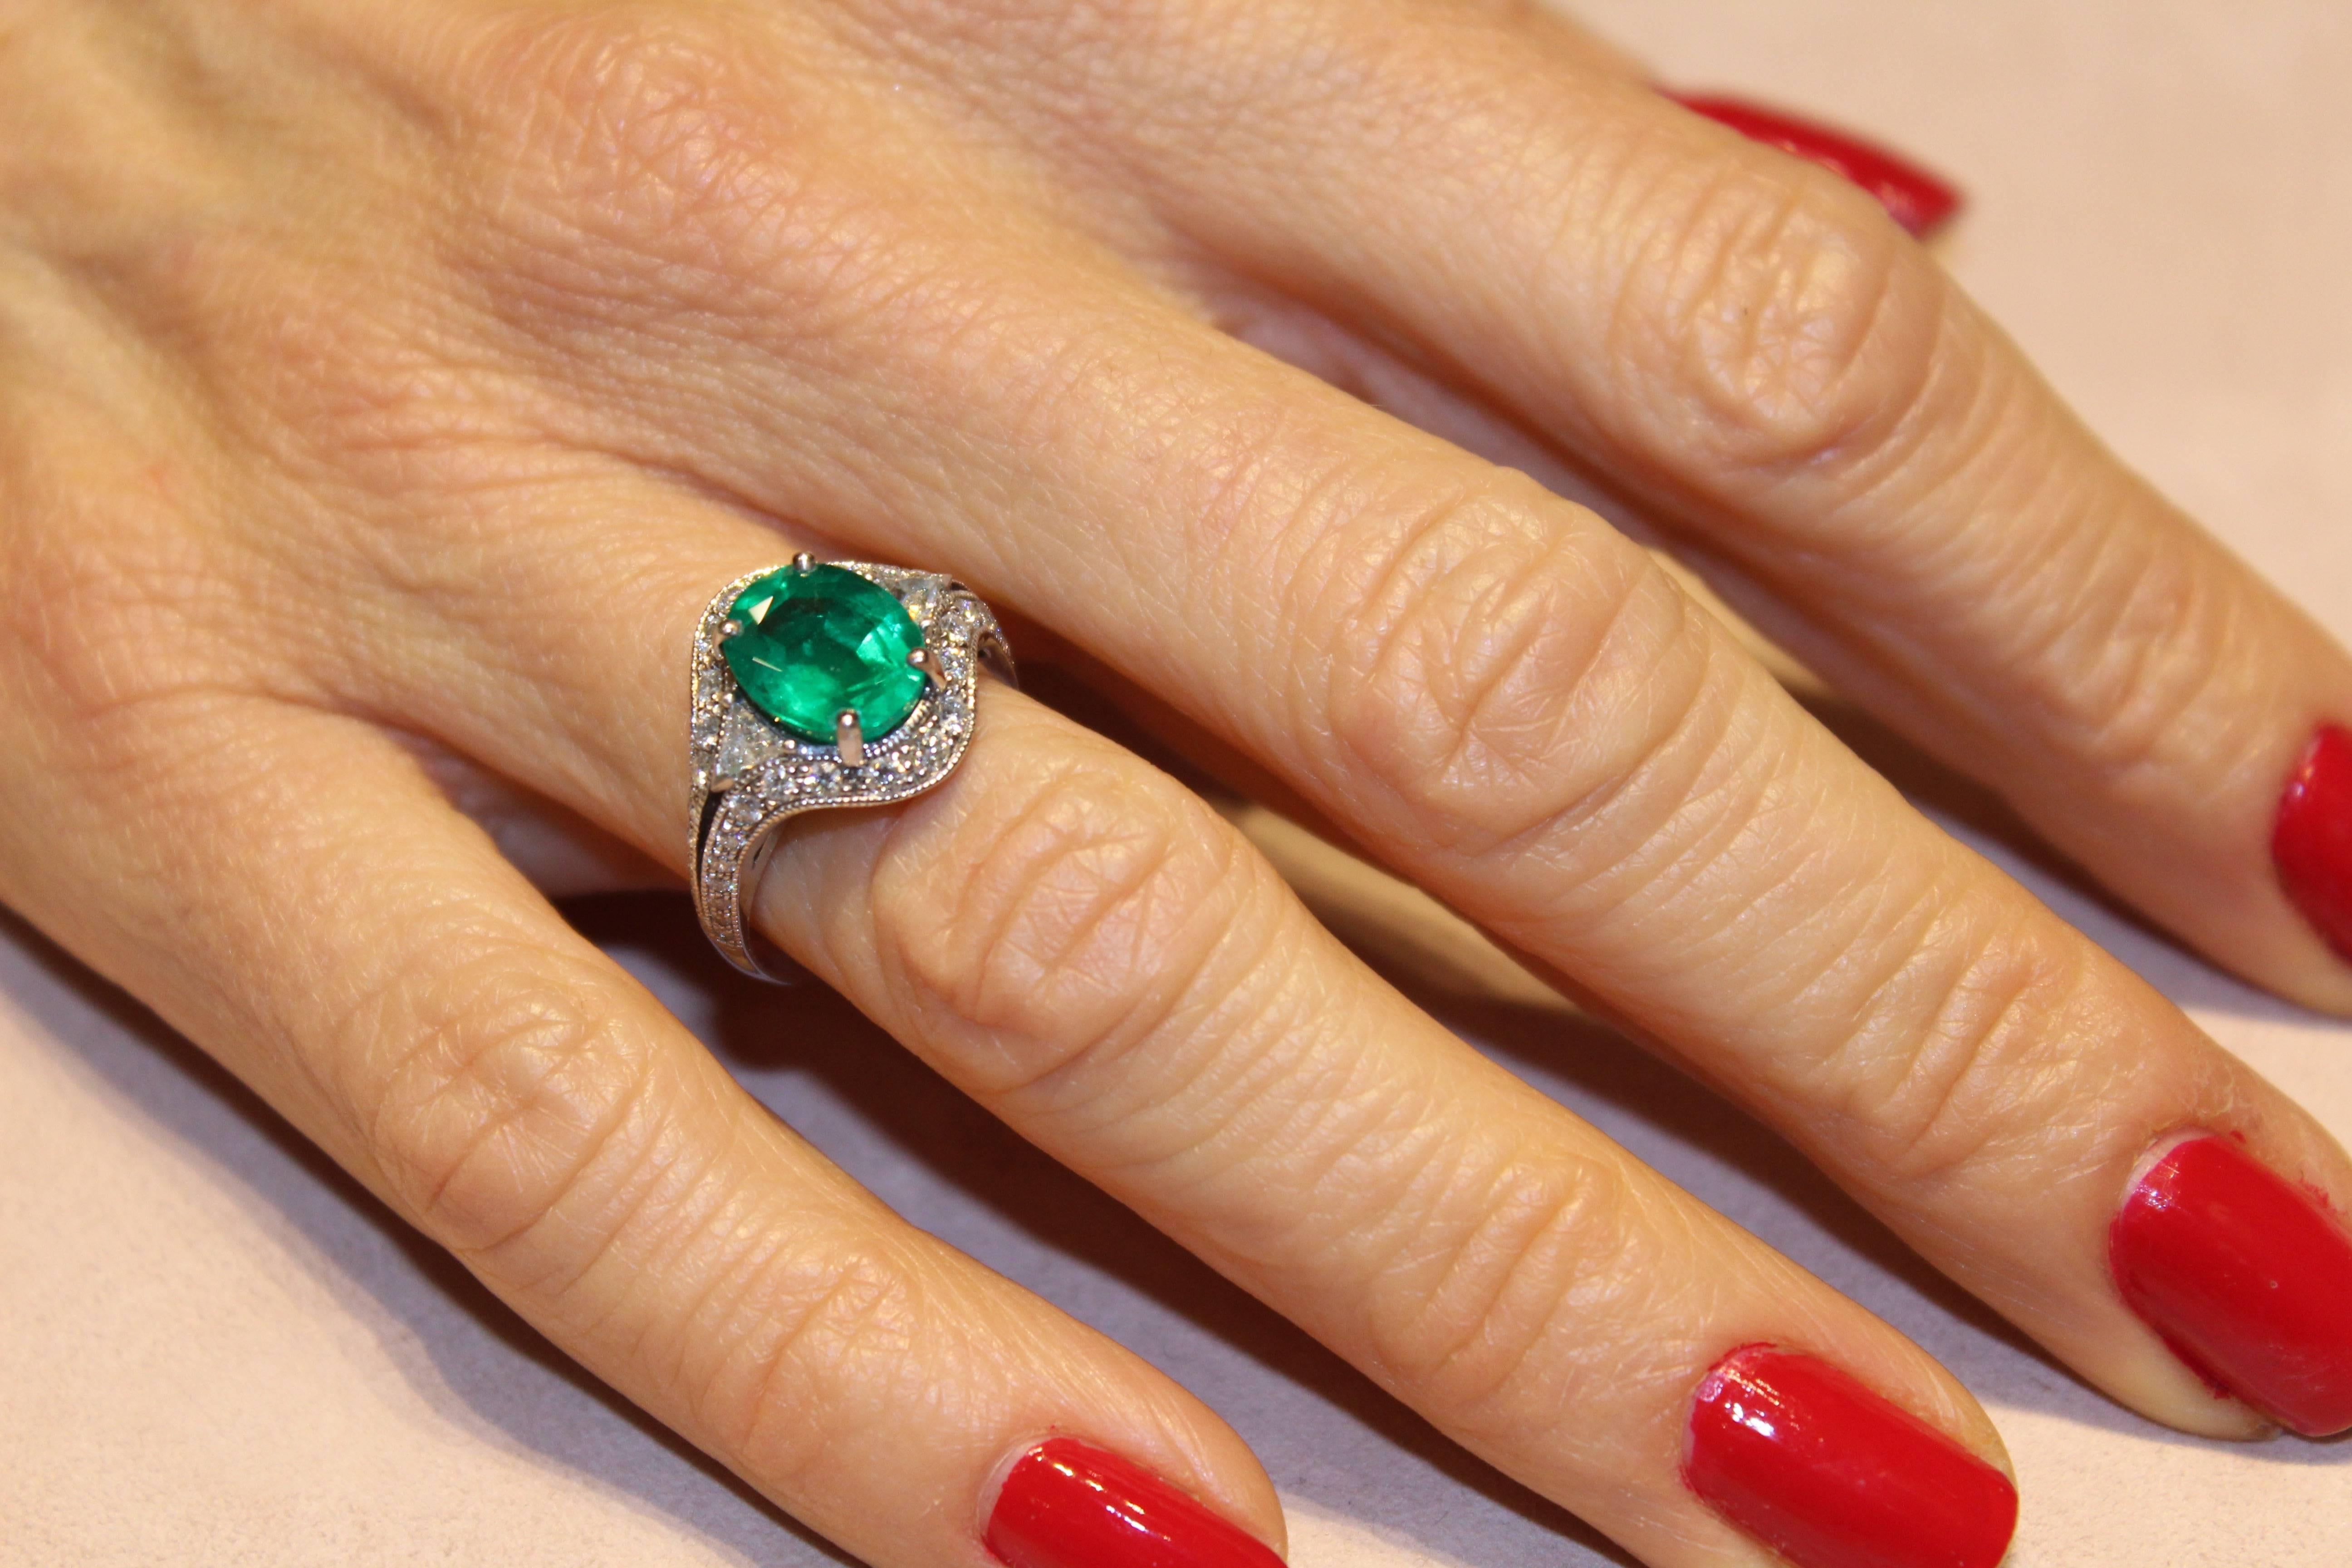 The 'Grace' ring is in 18 carat white gold and is  set with a central 2.53 carat Emerald in an Art Déco style enhanced by 2 triangle shape diamonds and pavé with a total of 0.74 carats

As a familly tradition,
Valerie Danenberg is a jewelry designer